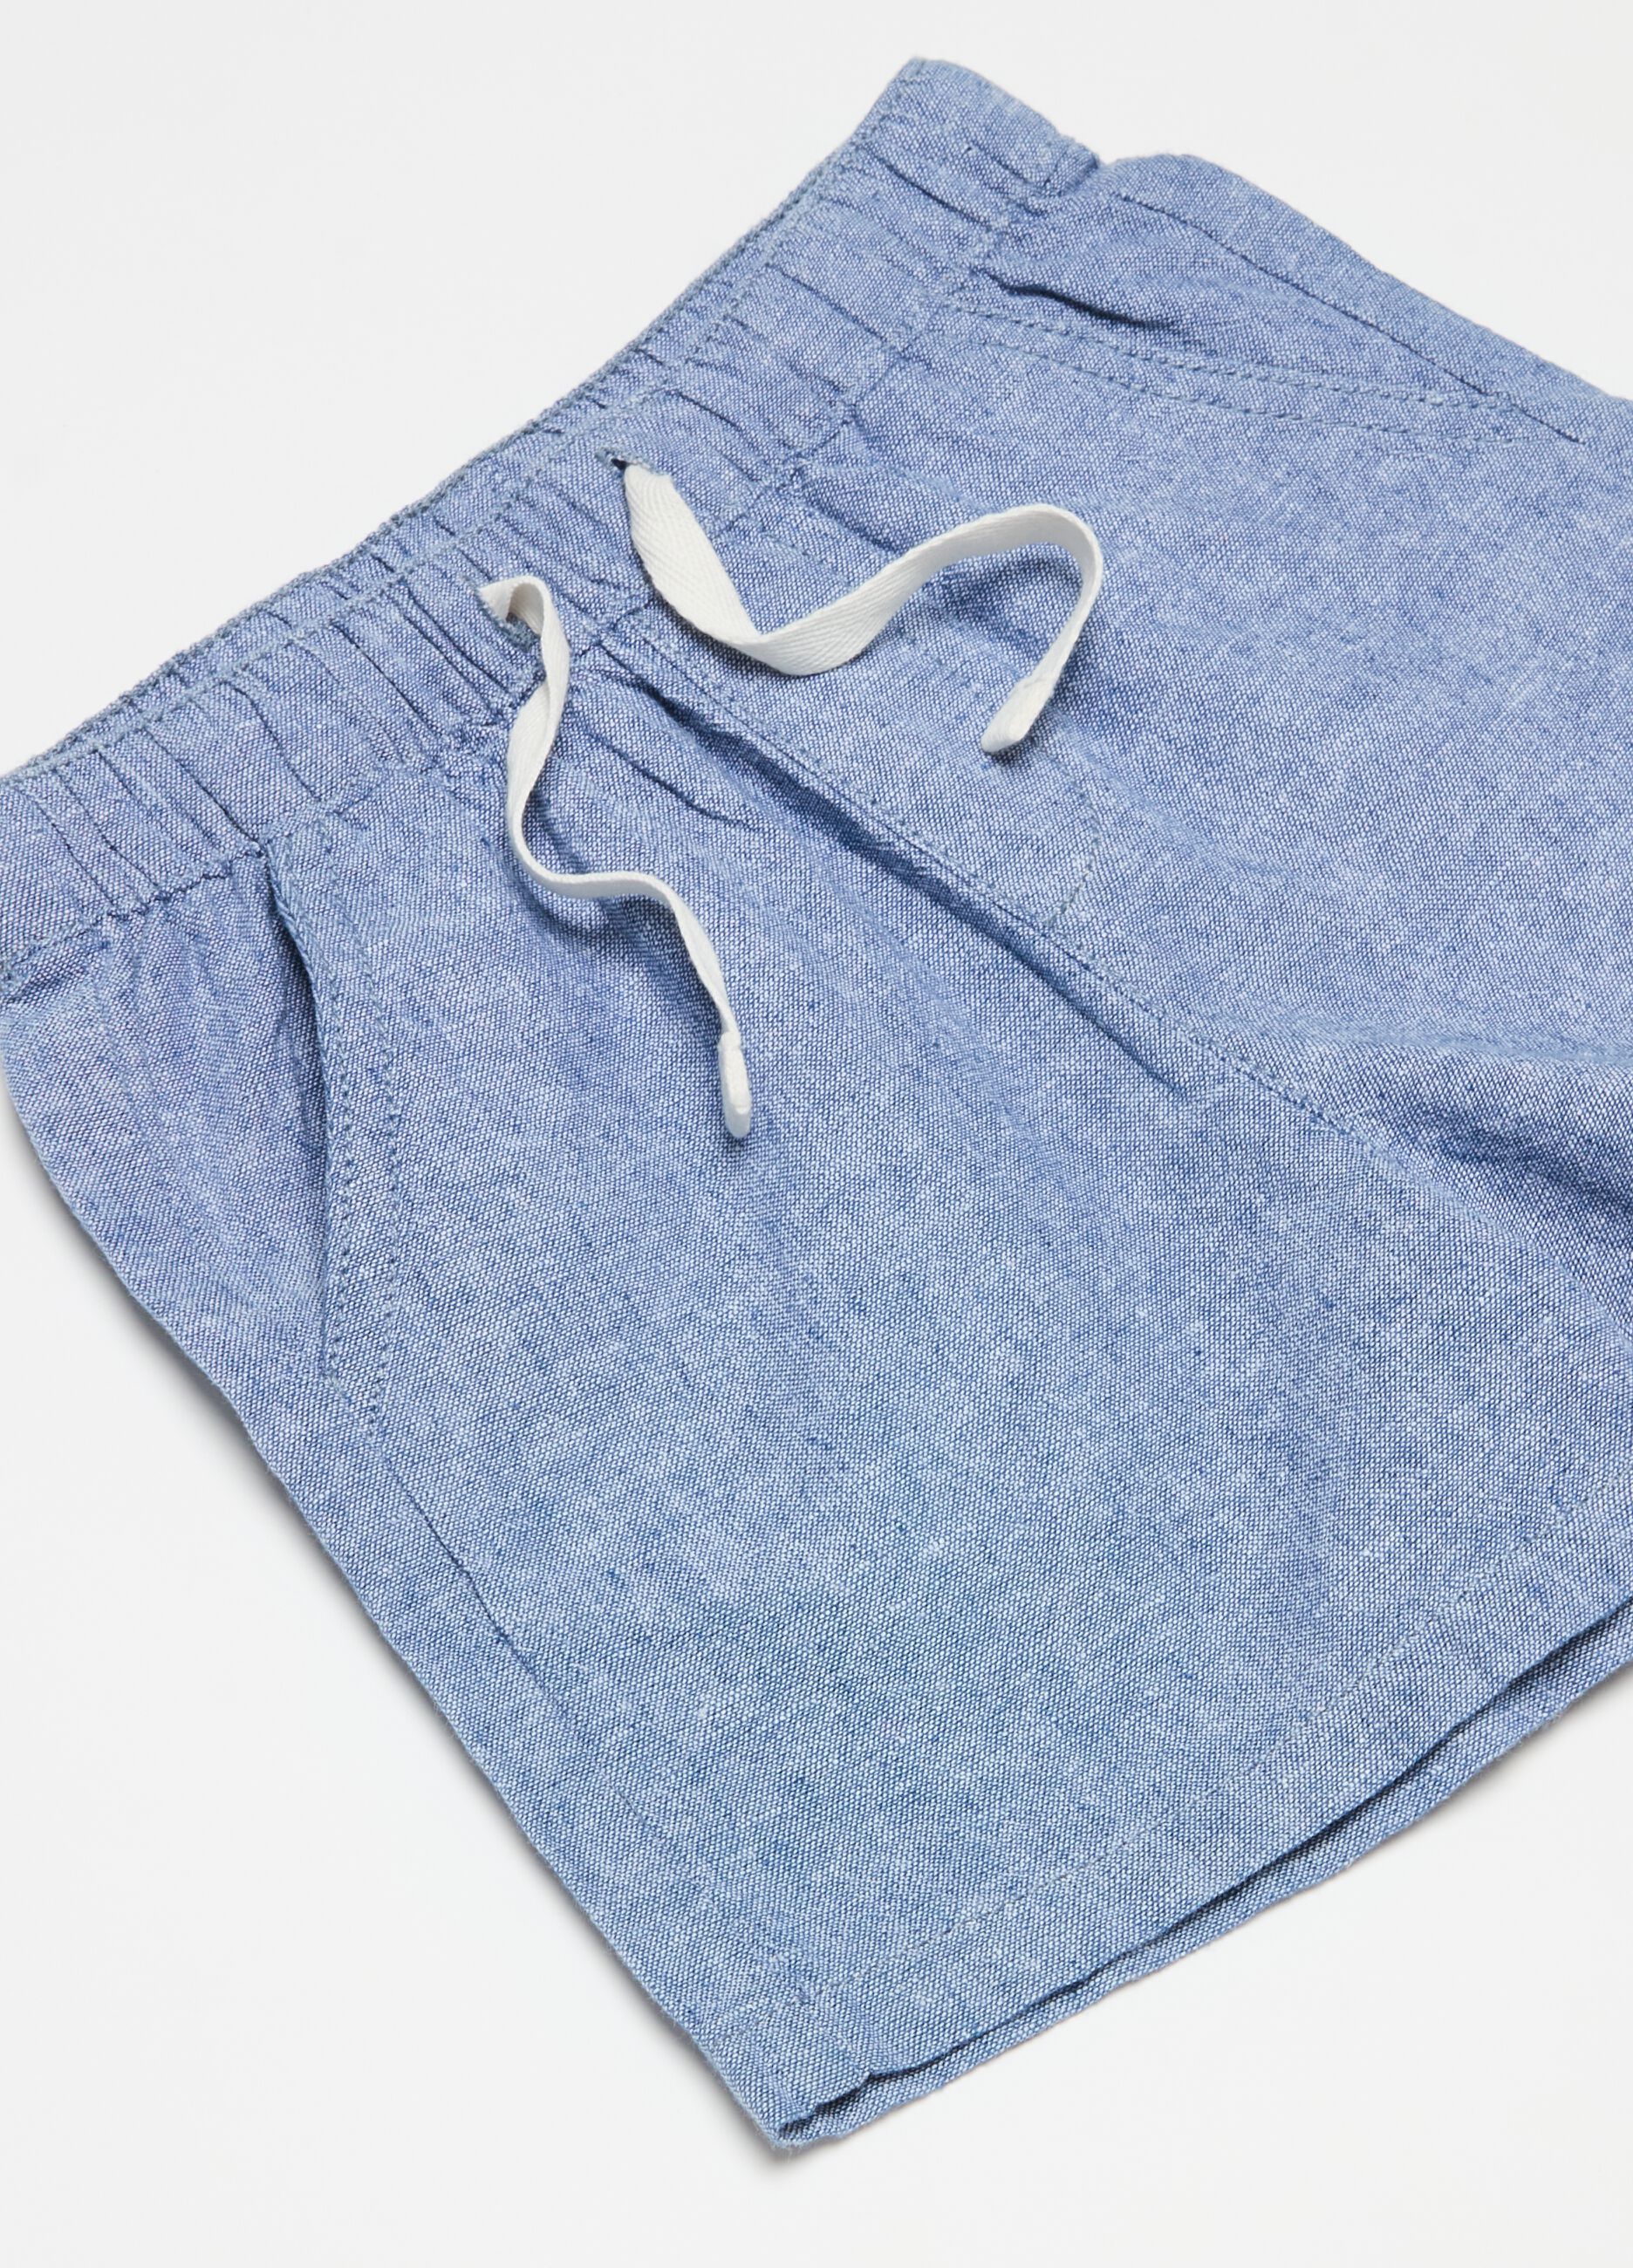 Bermuda shorts in linen and cotton with drawstring